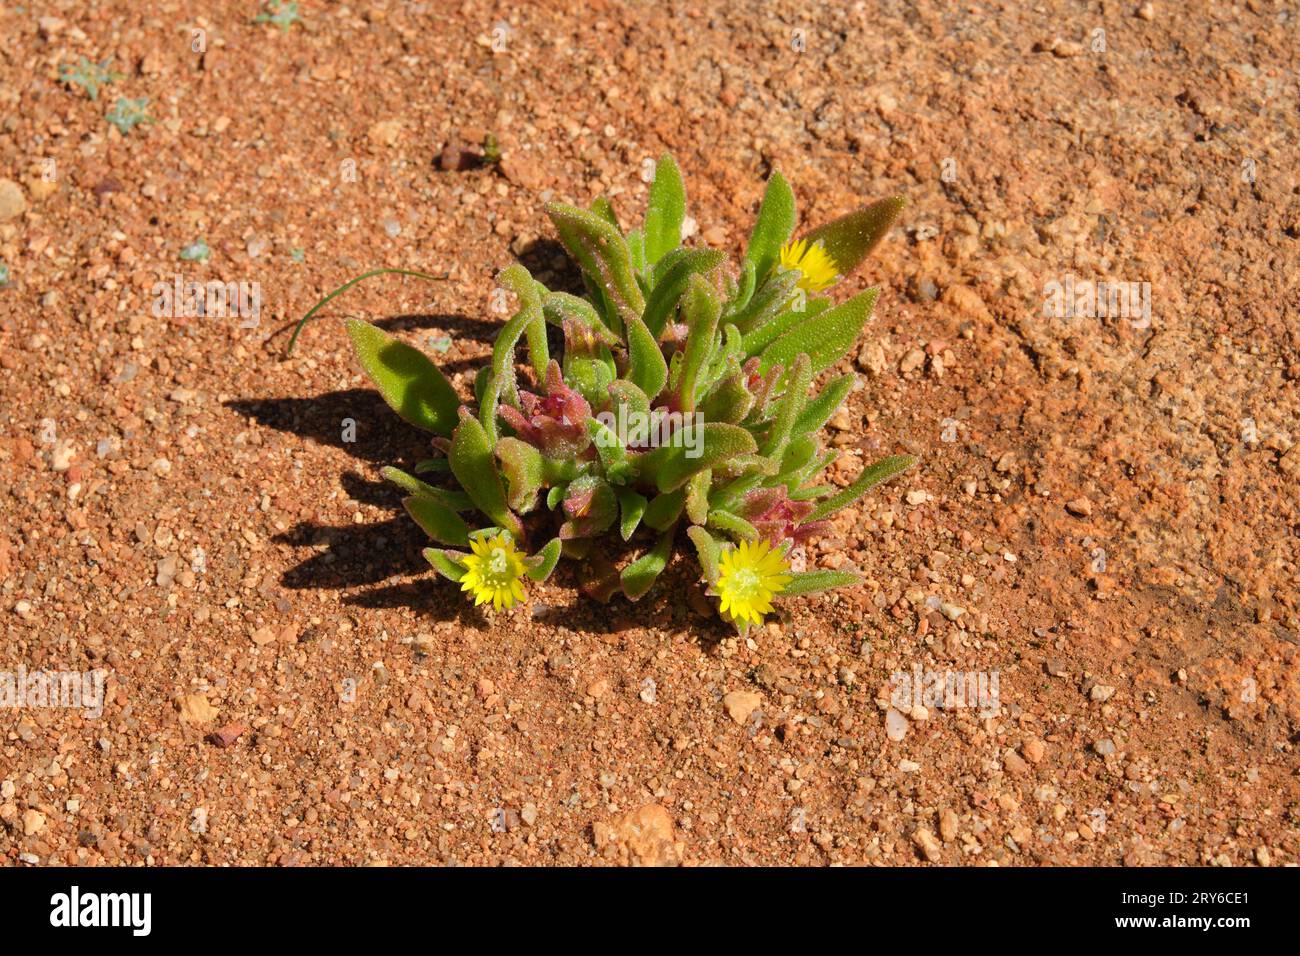 A succulent with small, yellow flowers growing on the granite surface of Eaglestone Rock in the Wheatbelt region of Western Australia. Stock Photo